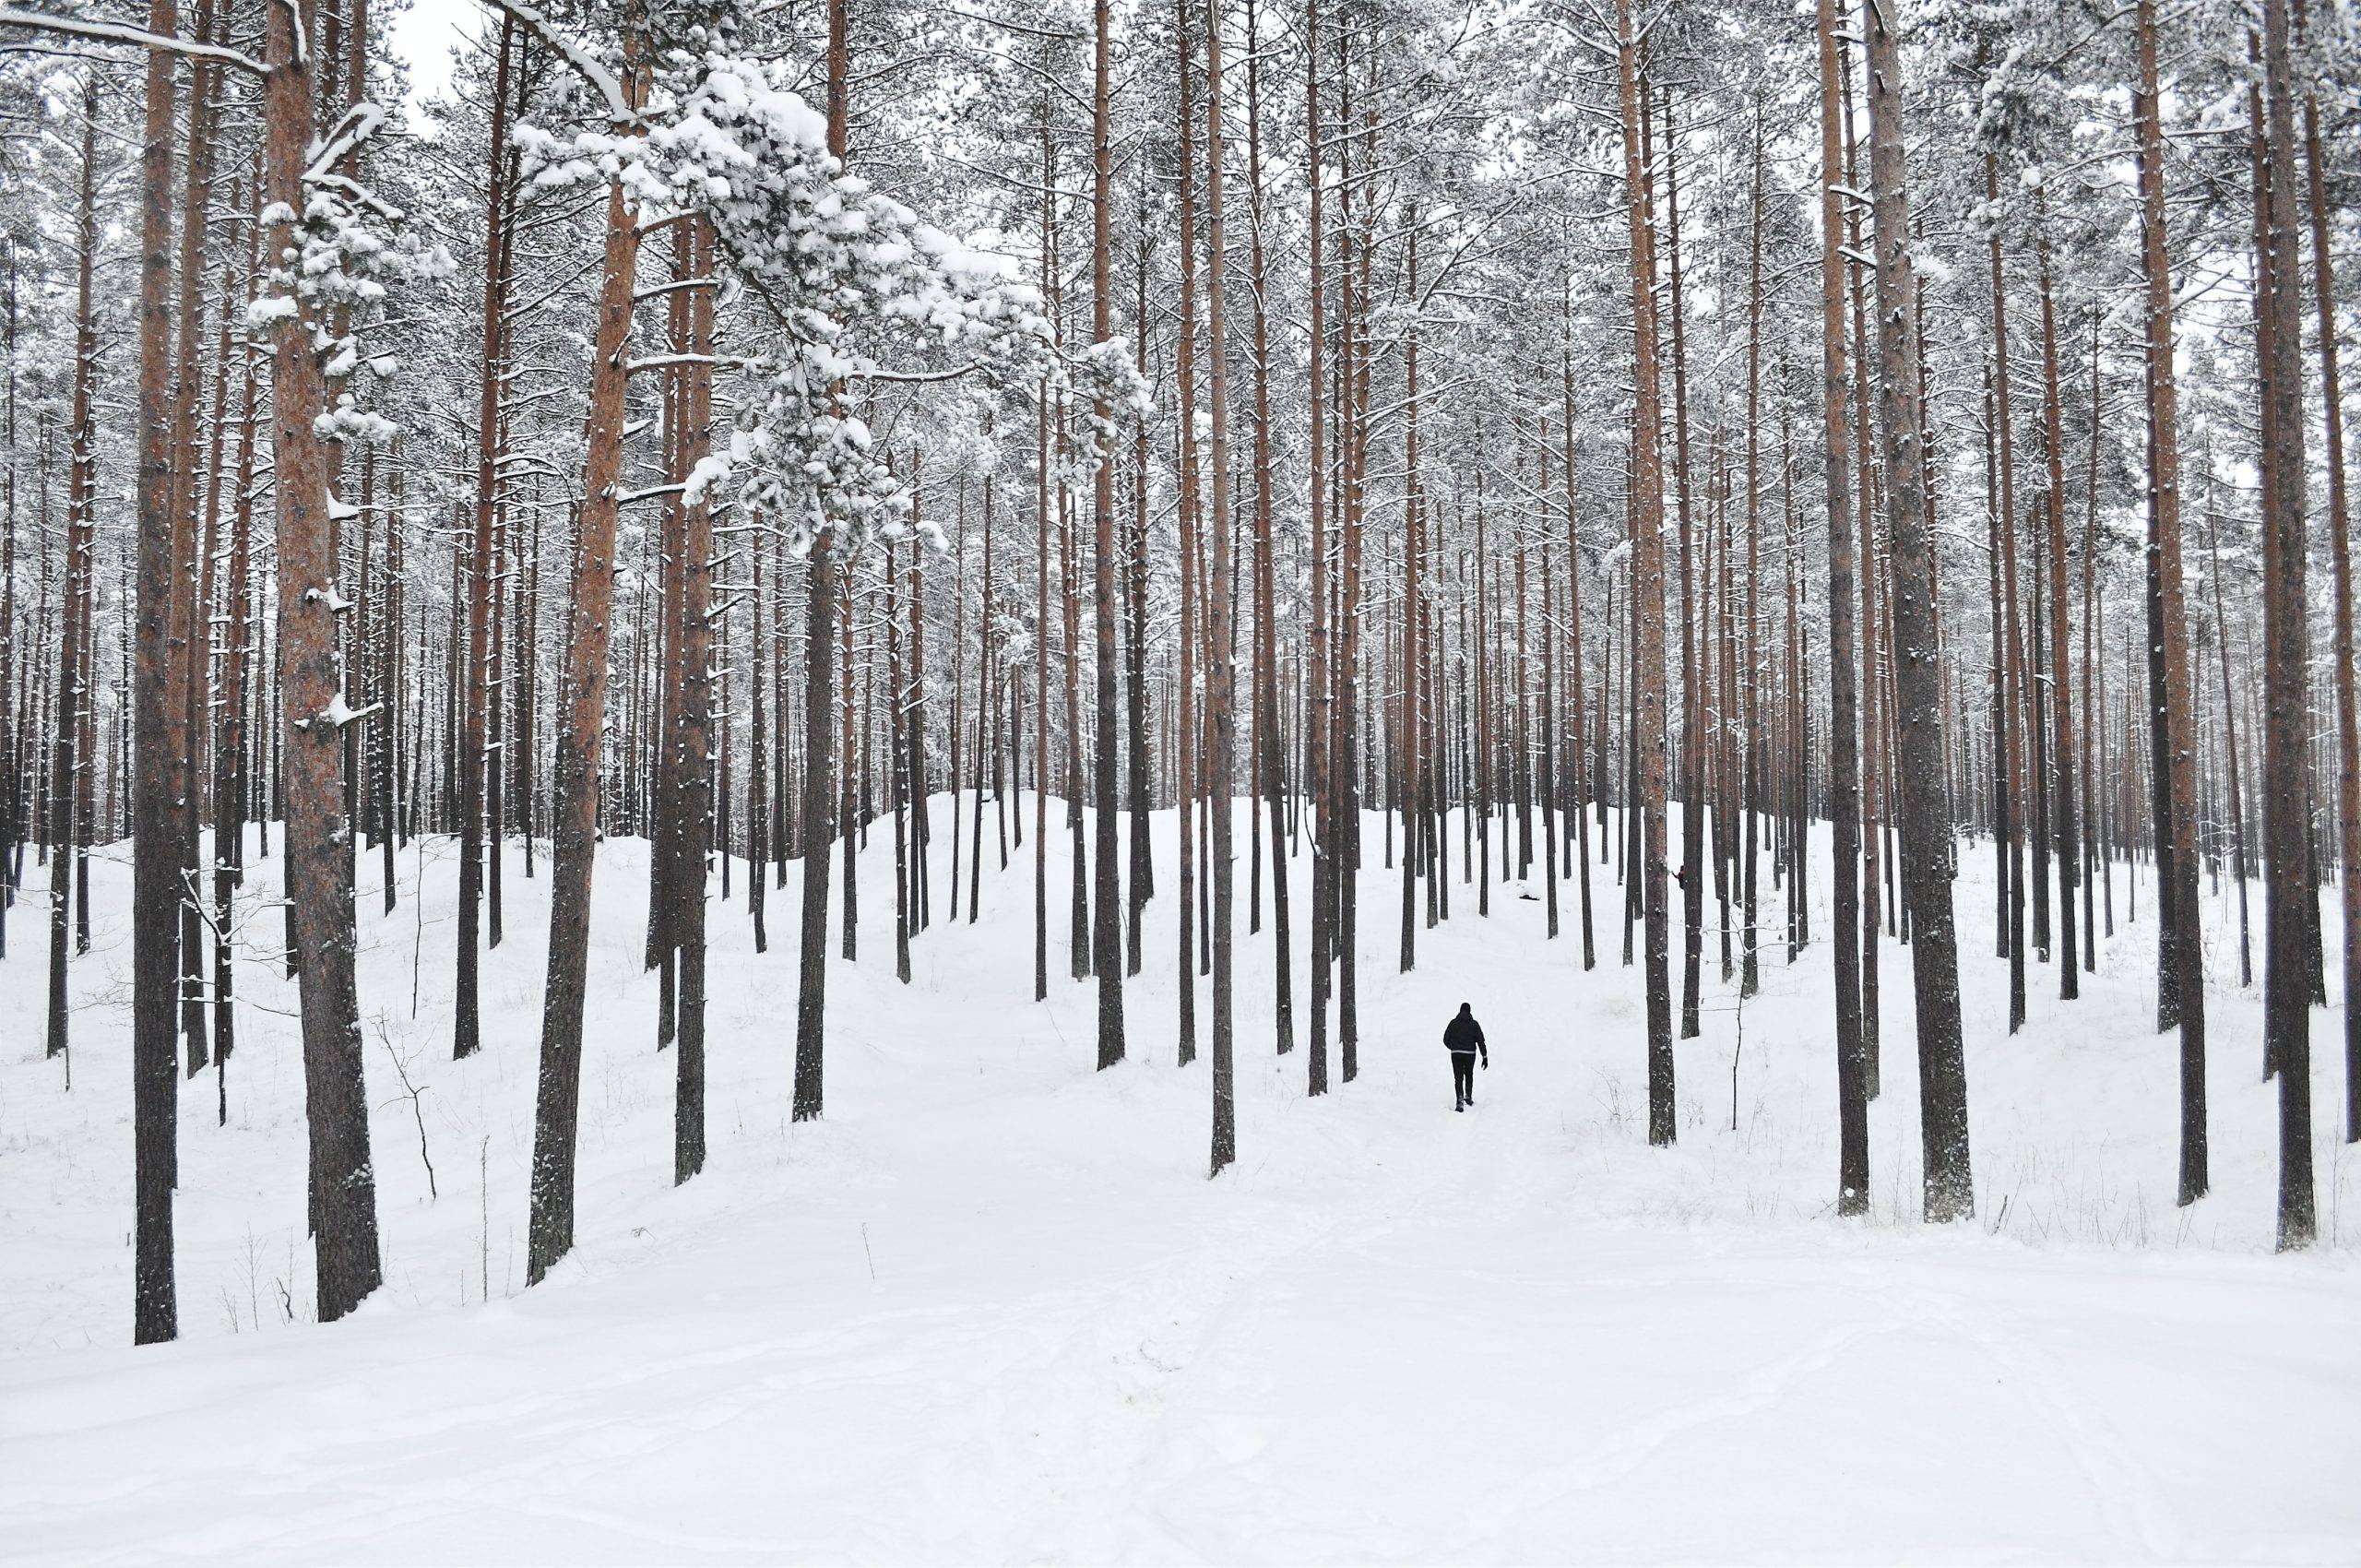 How Minimalism Can Help You Approach the New Year Worry-Free - minimalist new year's resolutions - forest in snow